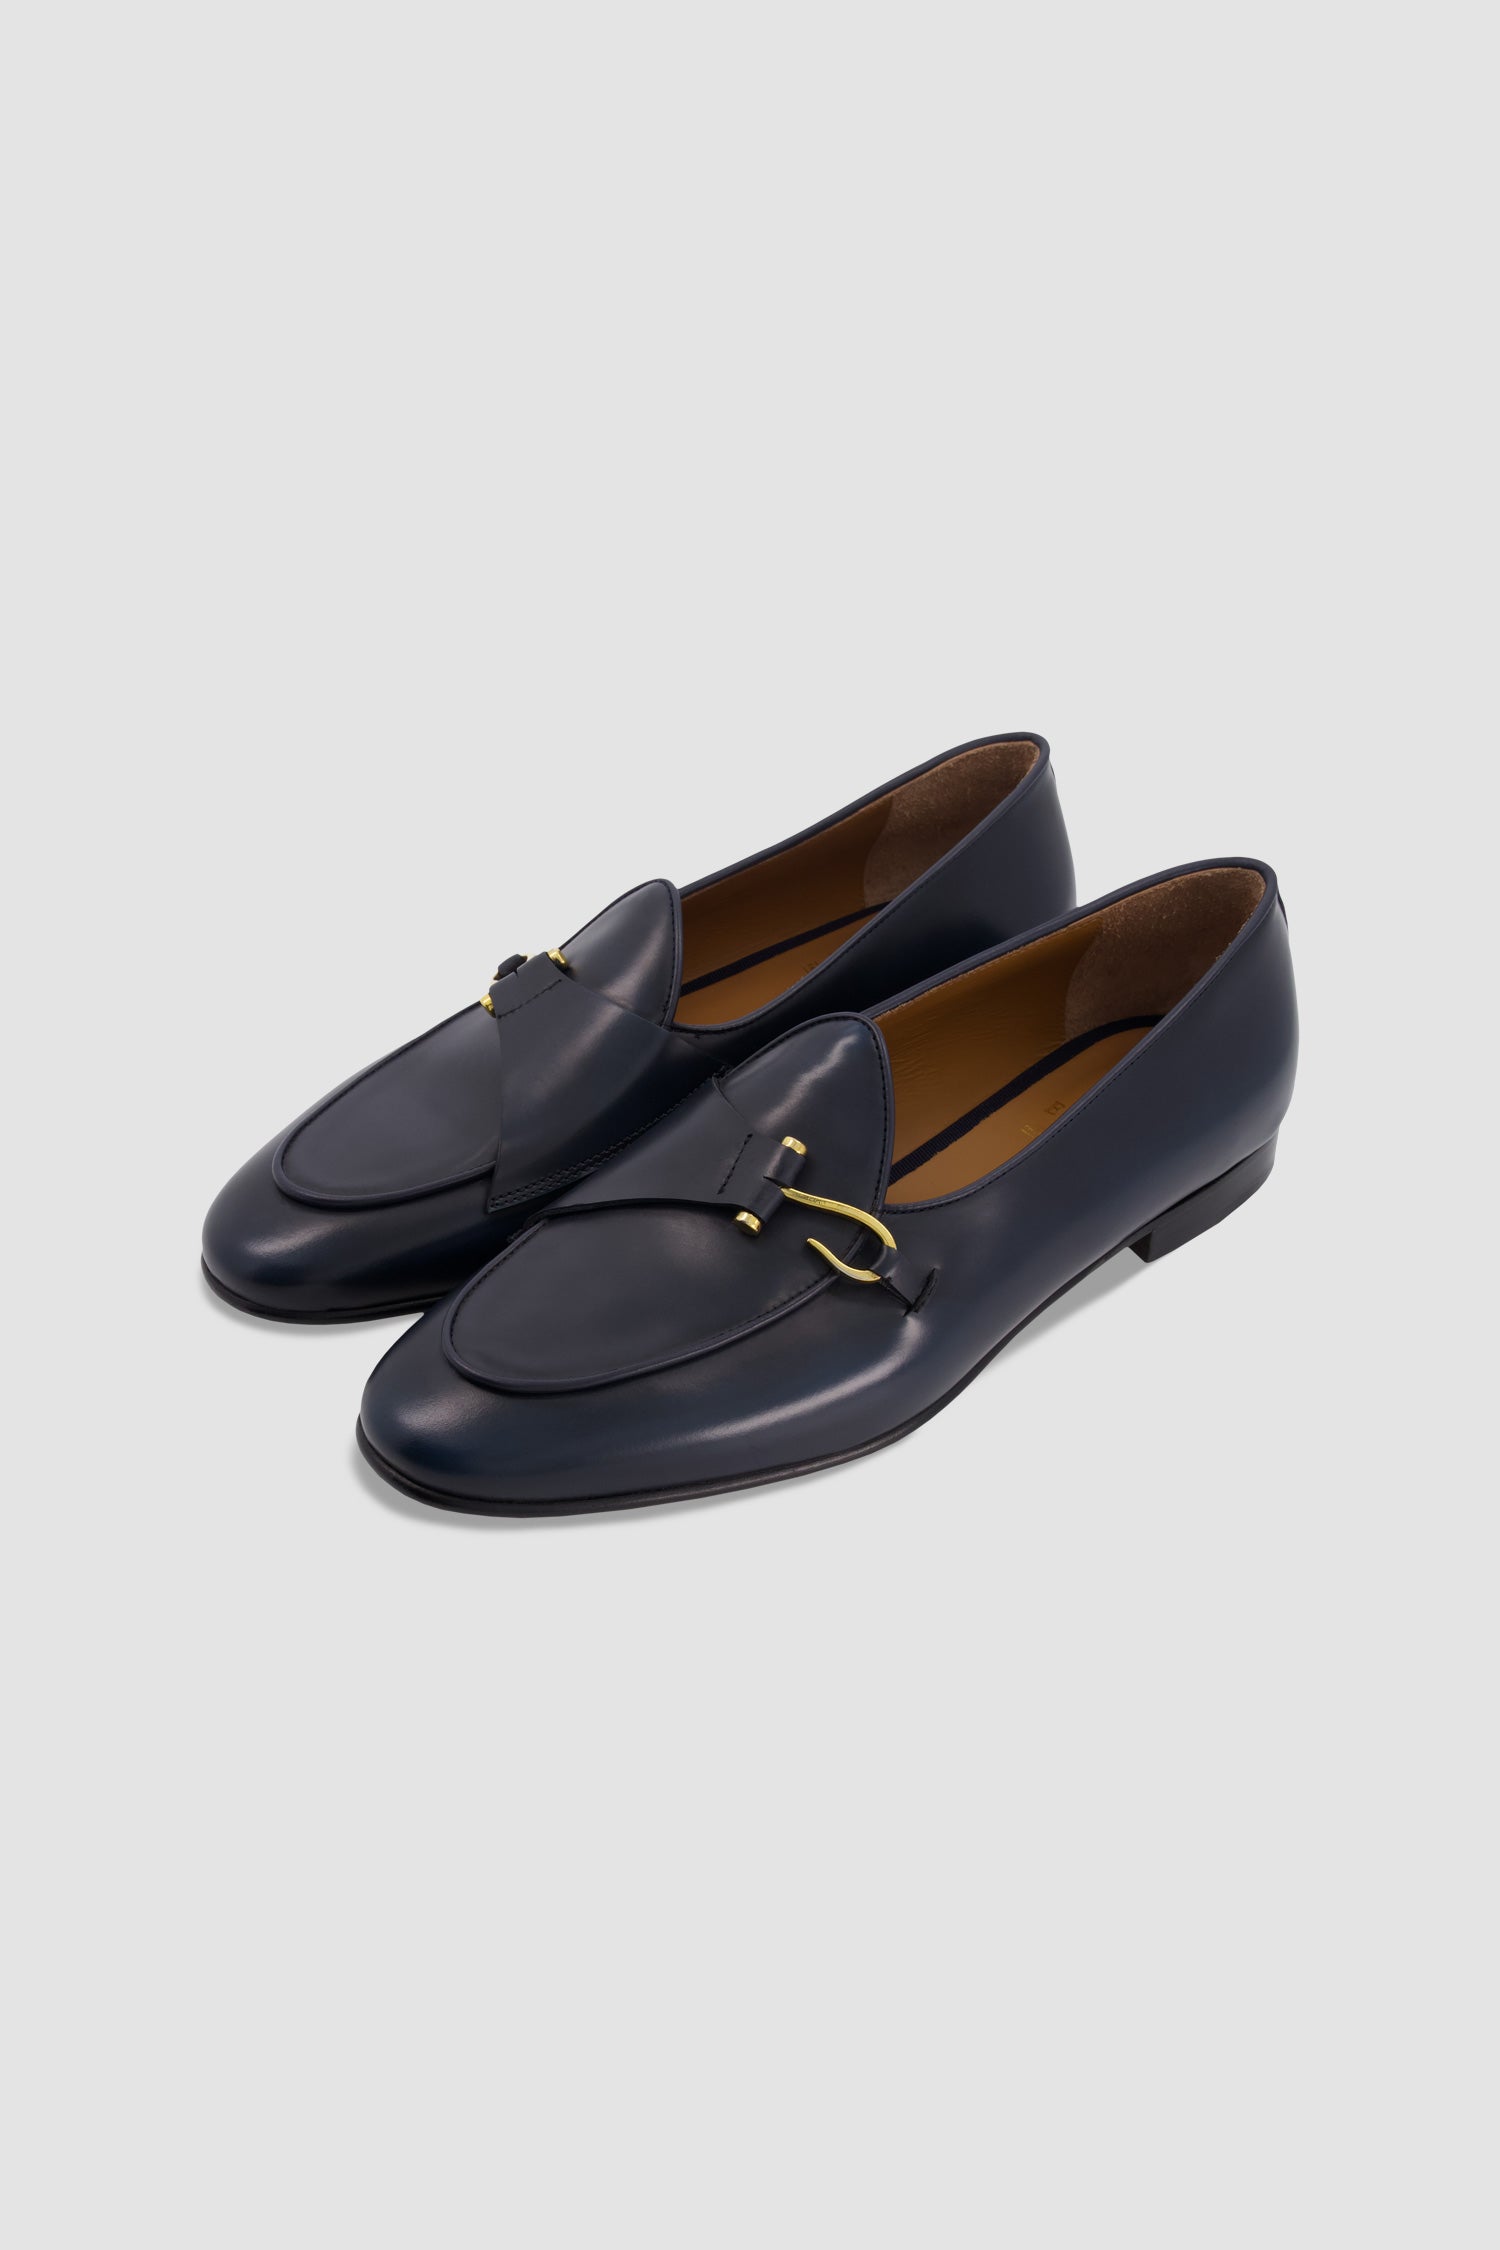 Edhen Milano Comporta Blue Leather Loafers